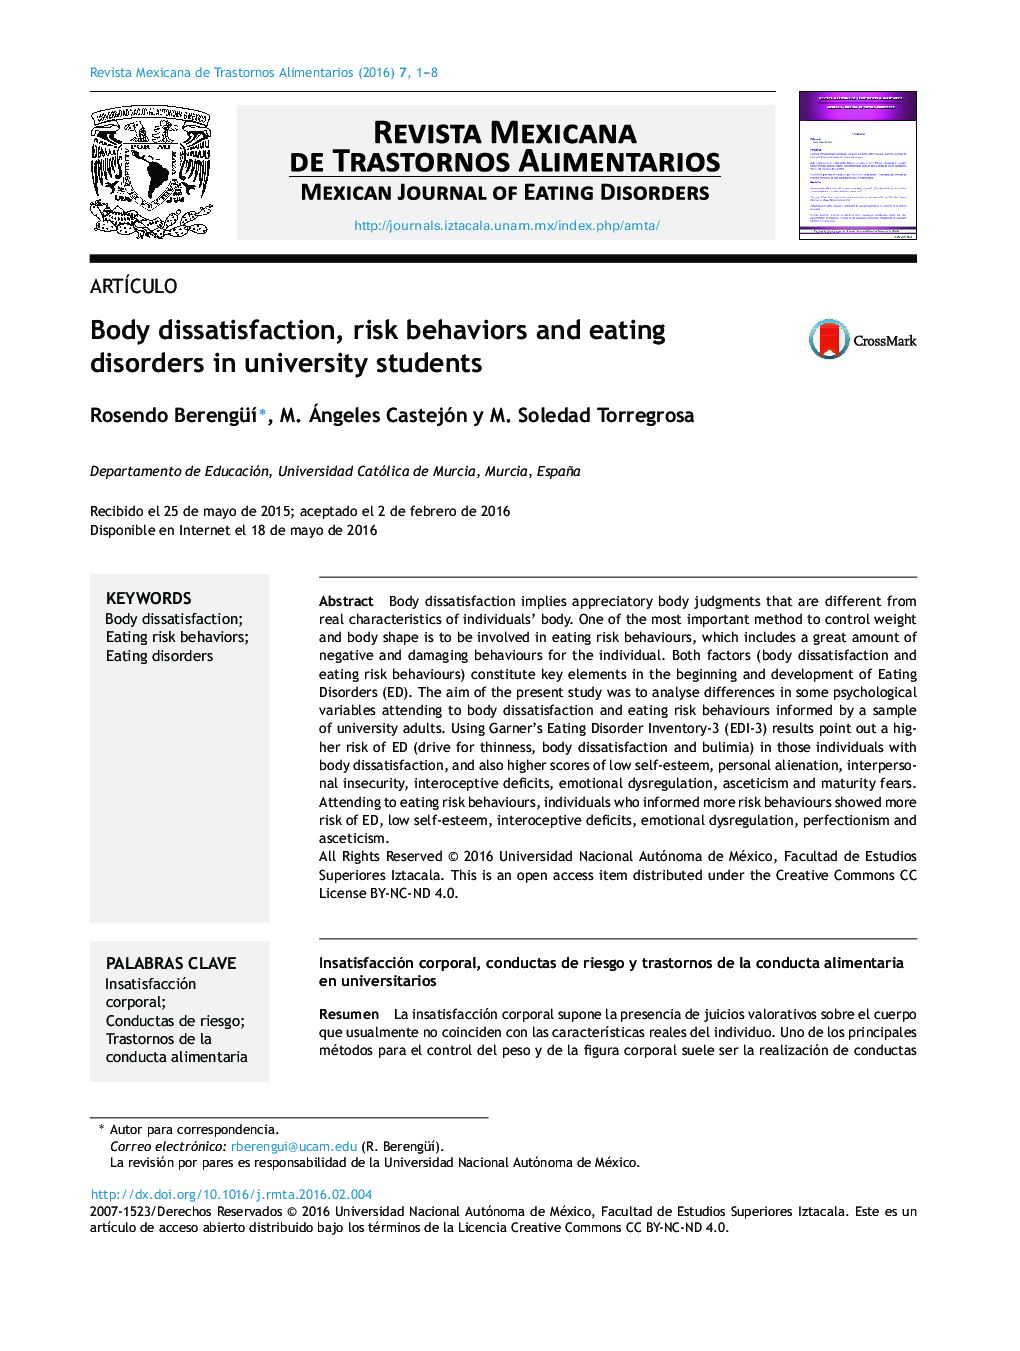 Body dissatisfaction, risk behaviors and eating disorders in university students 